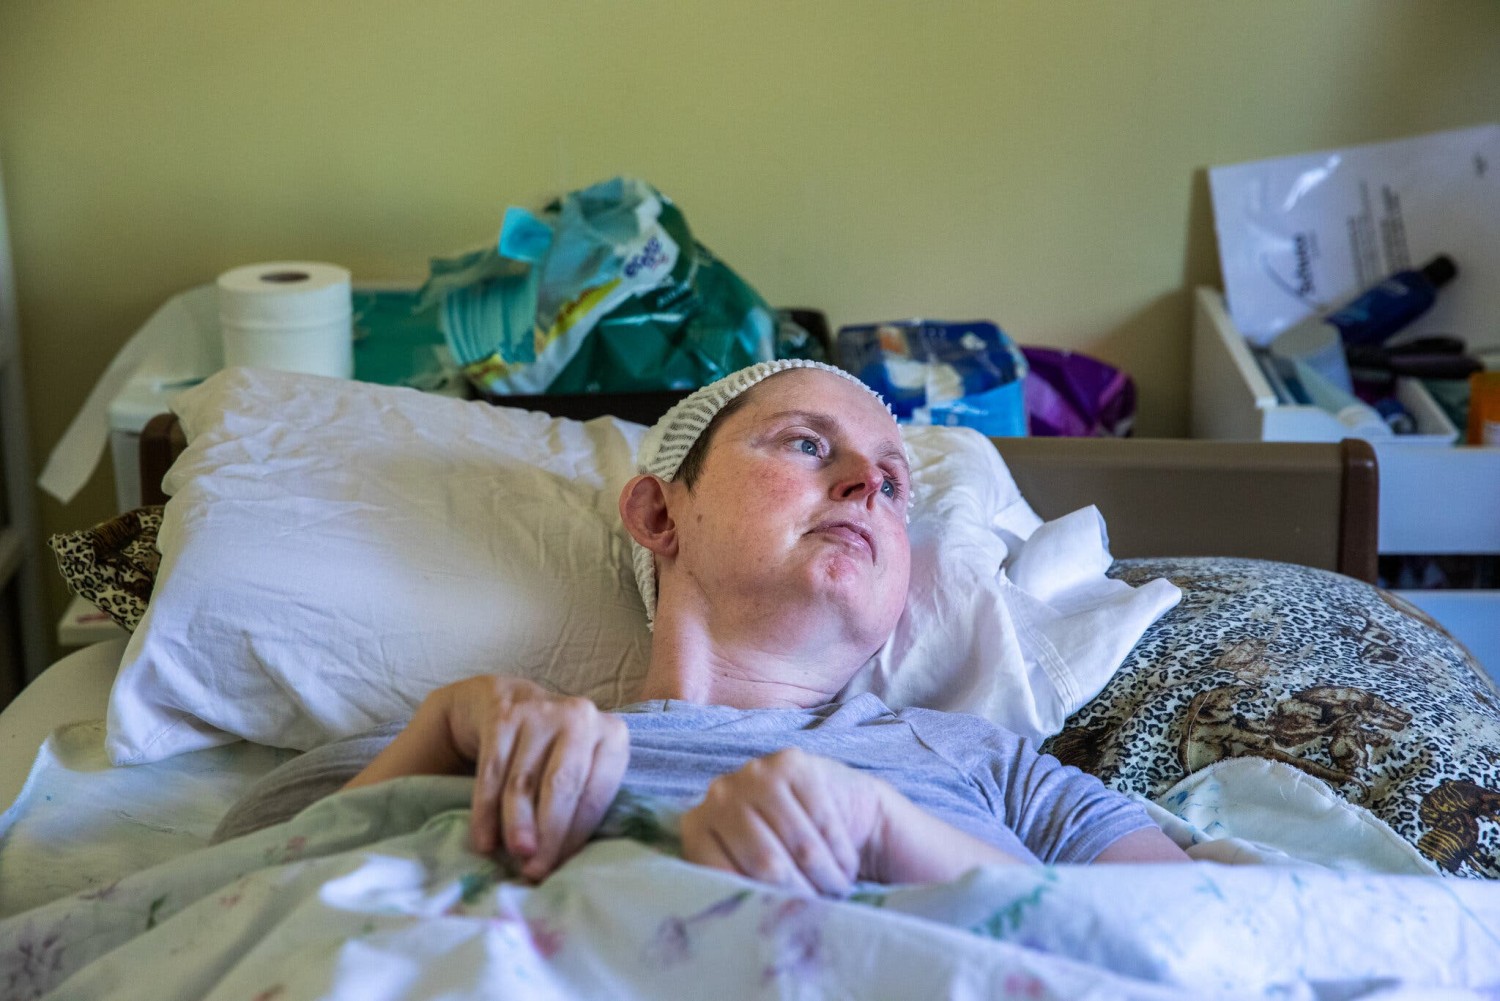 Ann Johnson, a teacher, volleyball coach and mother from Regina, Saskatchewan, had a paralyzing stroke in 2005 that took away her ability to speak.Credit...Sara Hylton for The New York Times